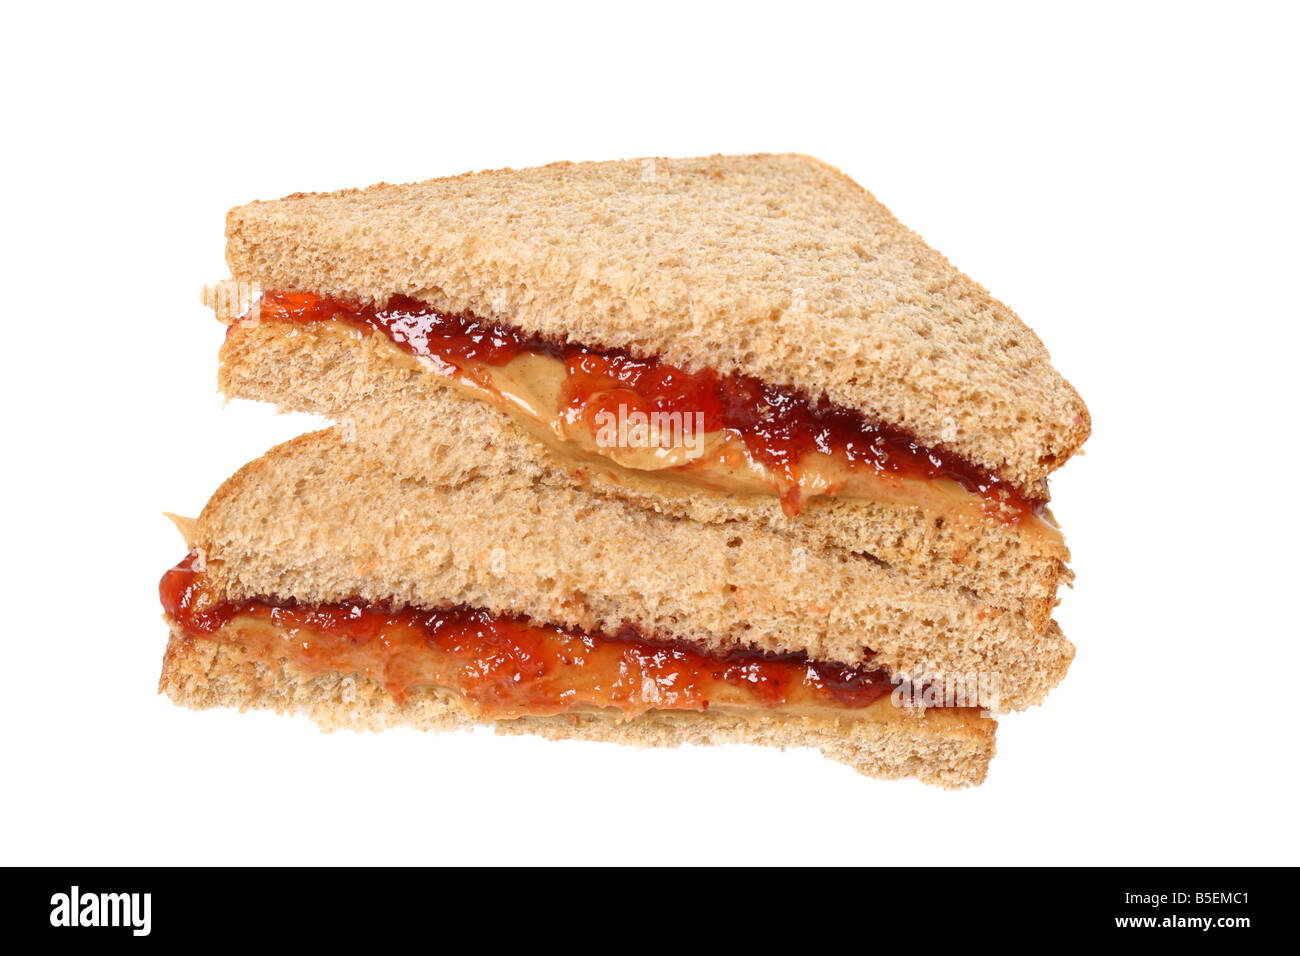 Peanutbutter and jelly sandwich cutout on white background Stock Photo